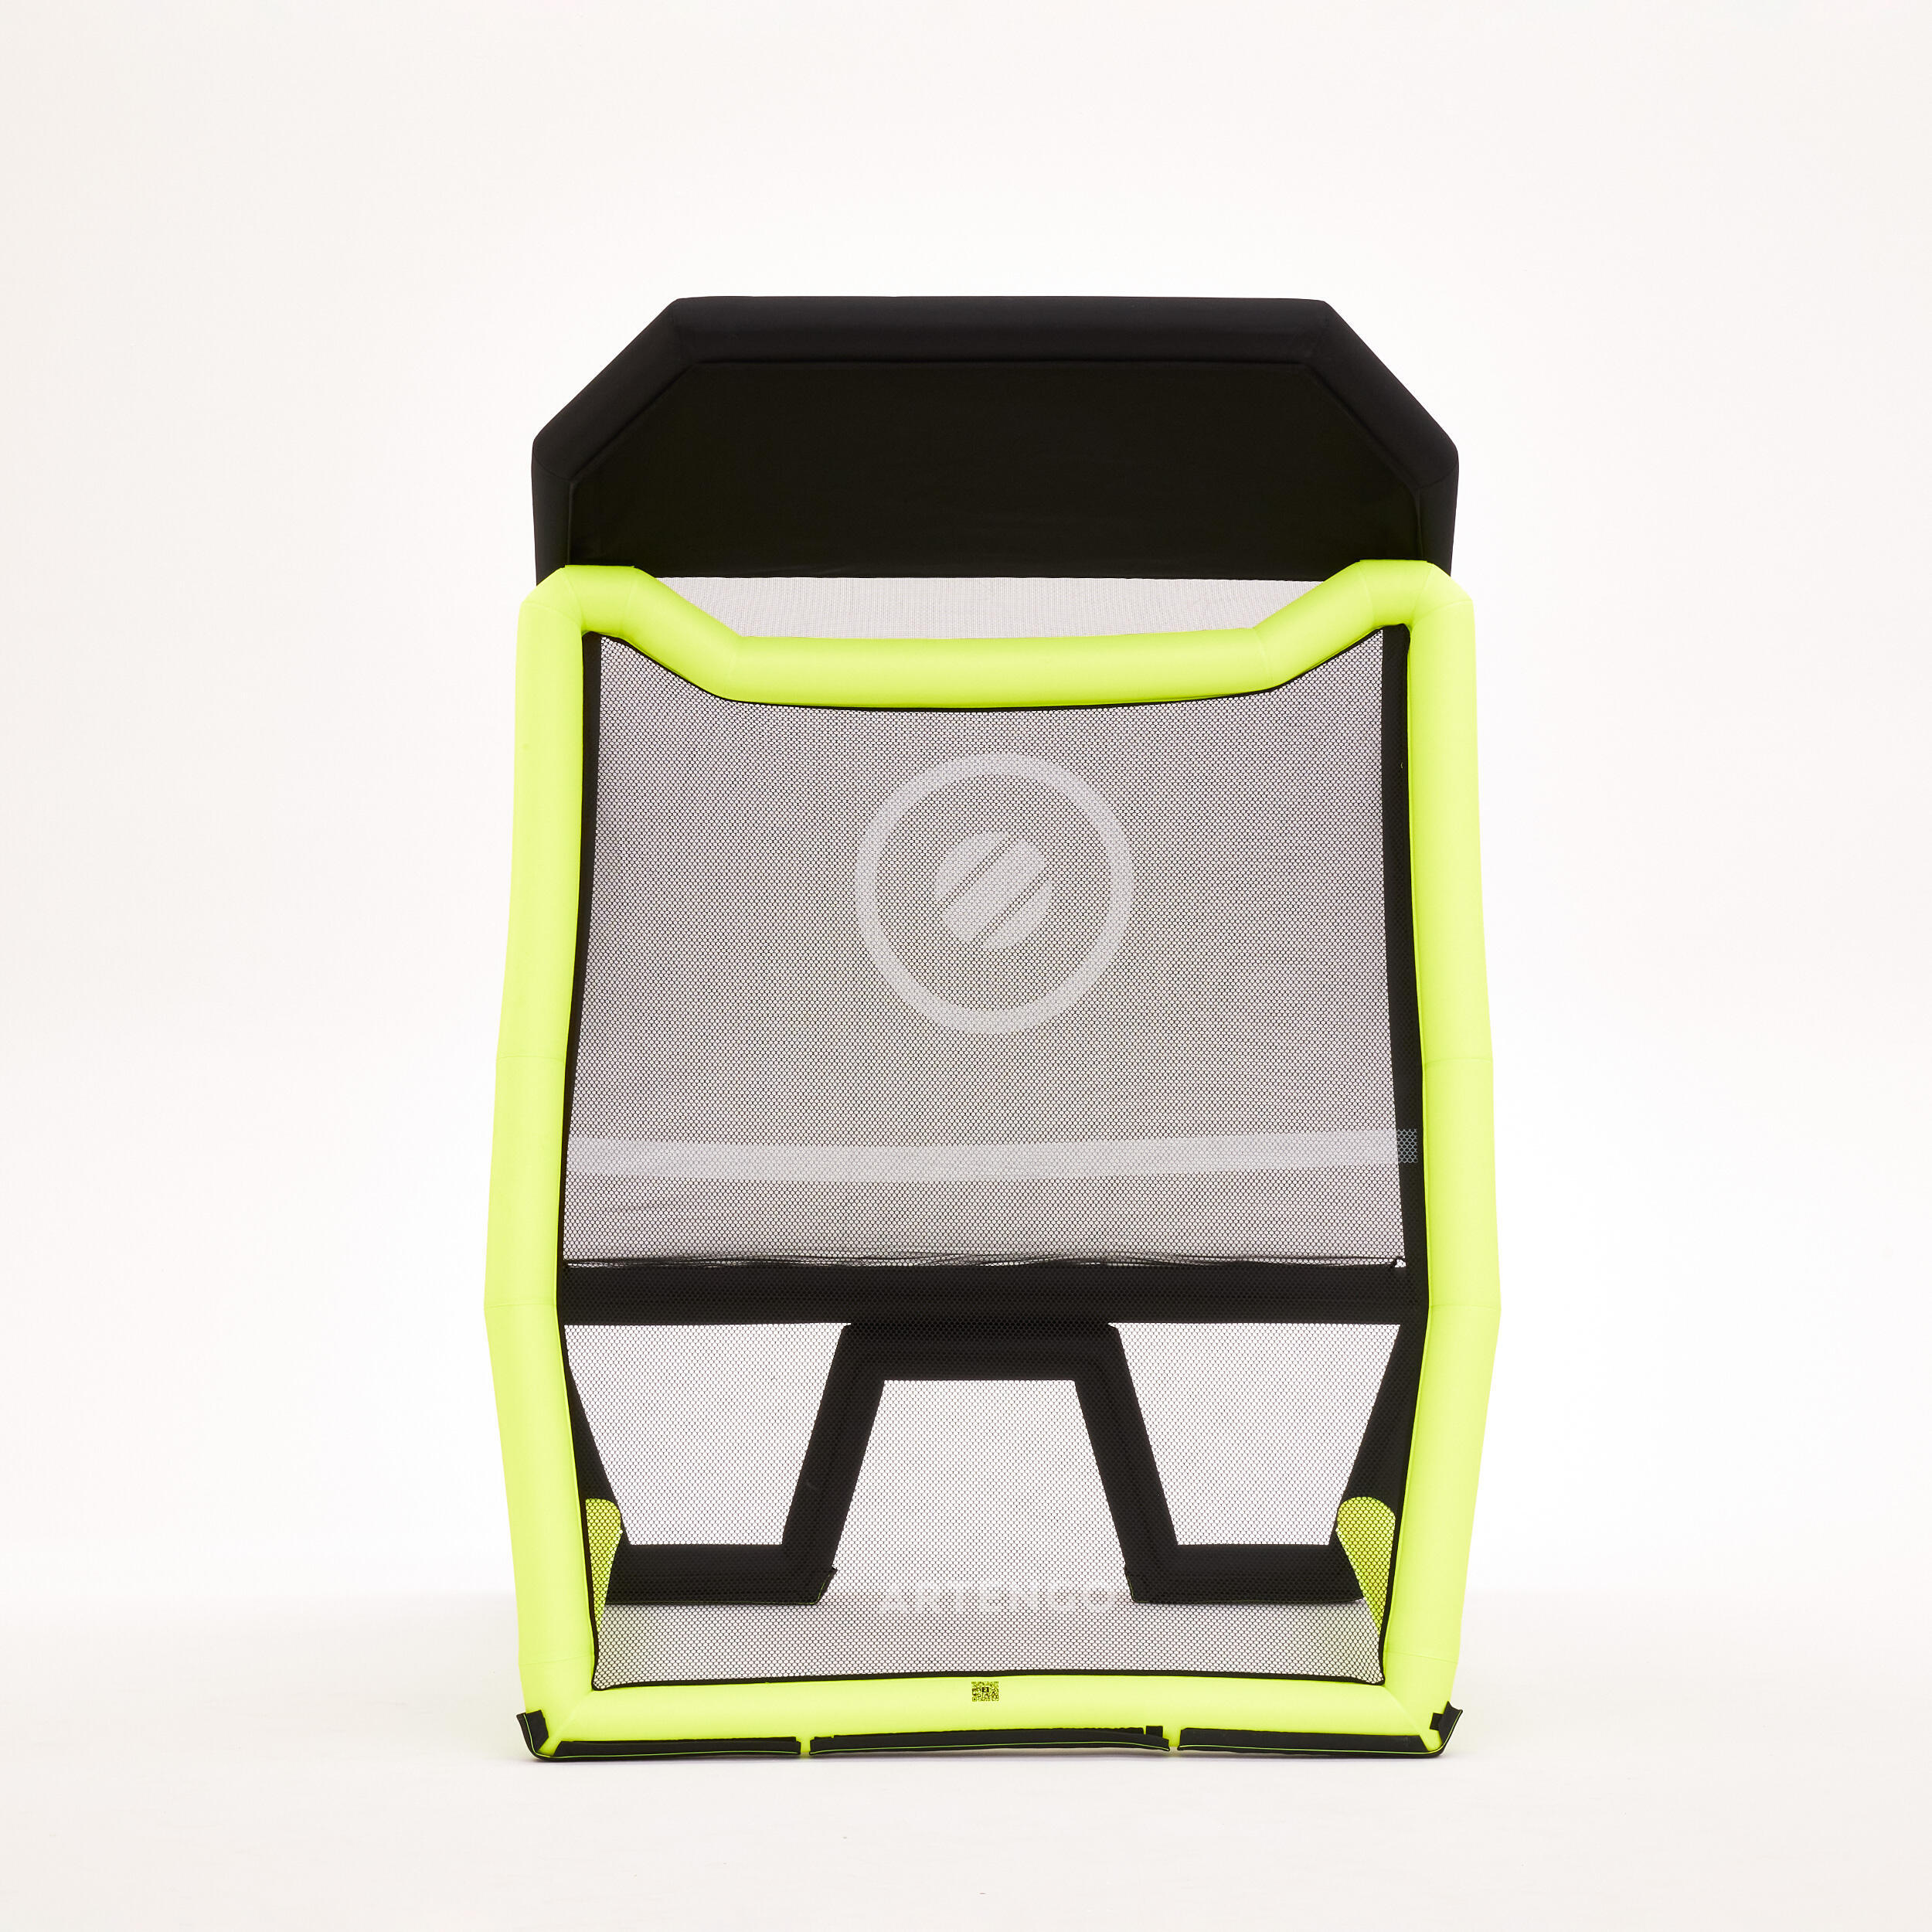 Compact Two-Sided Tennis Training Wall - Black/Yellow 4/10